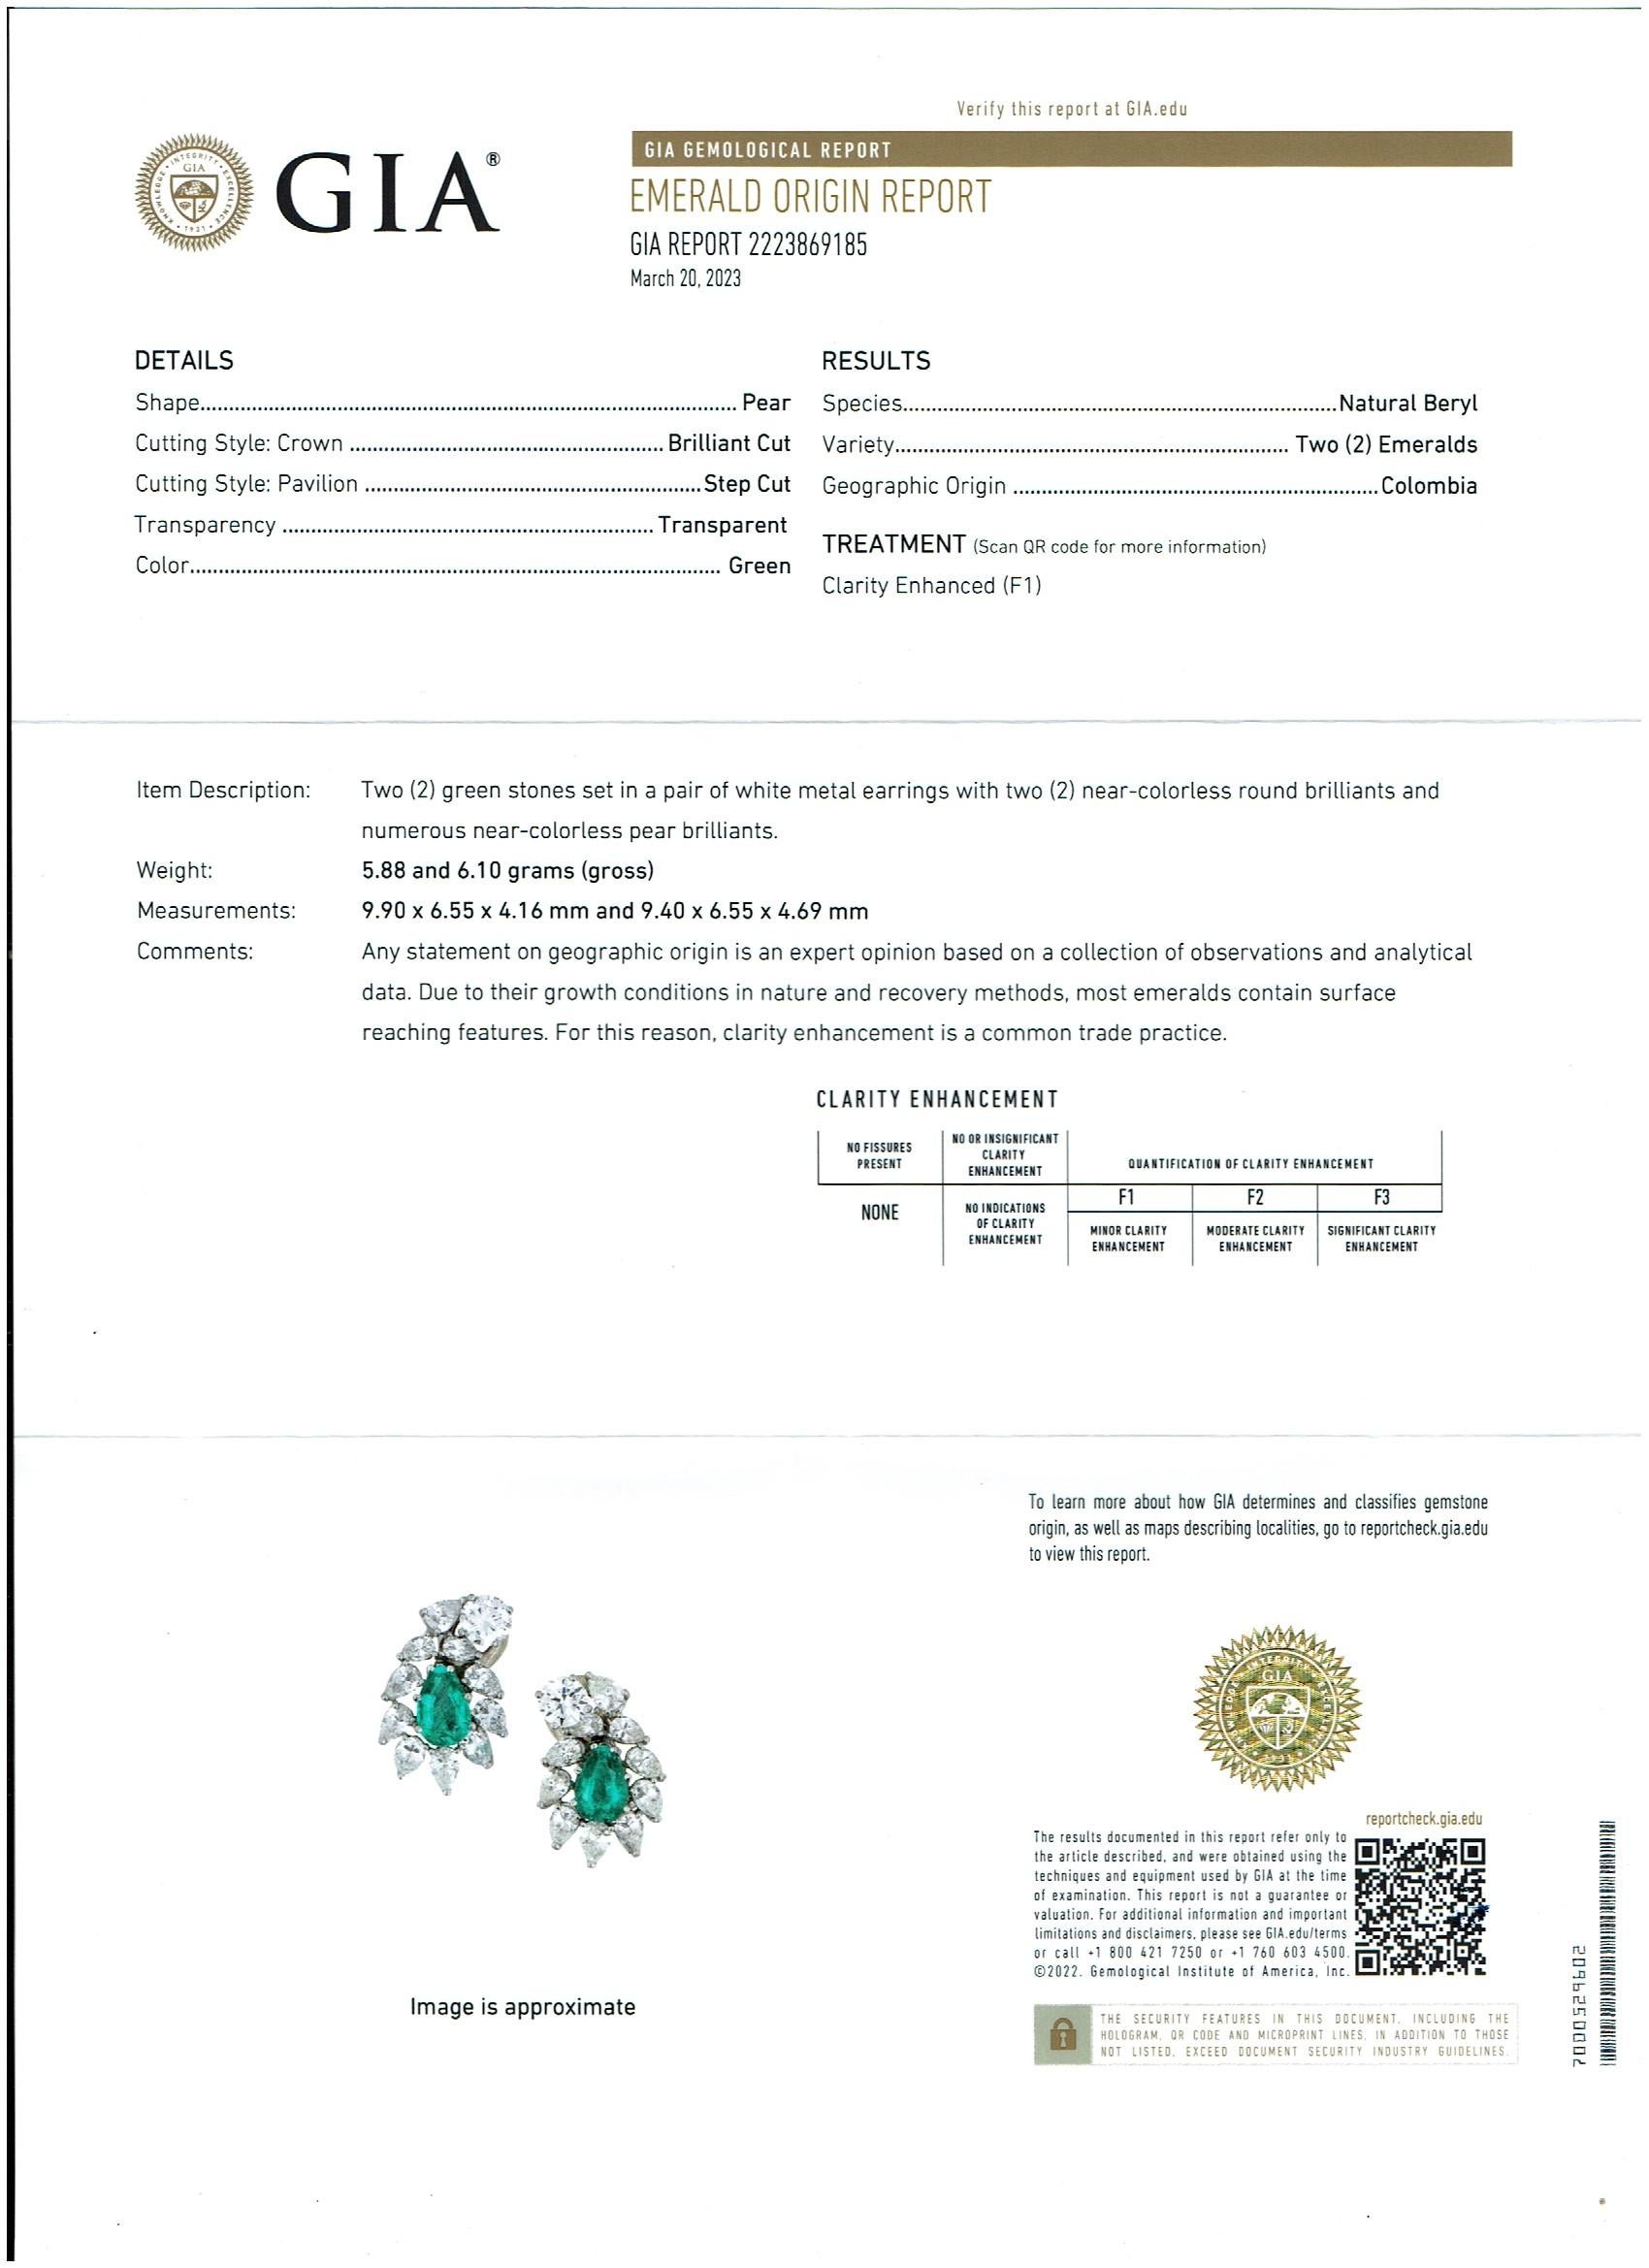 GIA Certified F1 4ct Colombian Emerald and 2 GIA Certificates for each of the Diamond 0.85 ct FVVS2 and 0.99 ct GVVS2 Earrings 18kW Gold
Finest pear shape Emerald Diamond Clip Earrings 18 Karat Gold with omega back
The color of the emerald is a deep